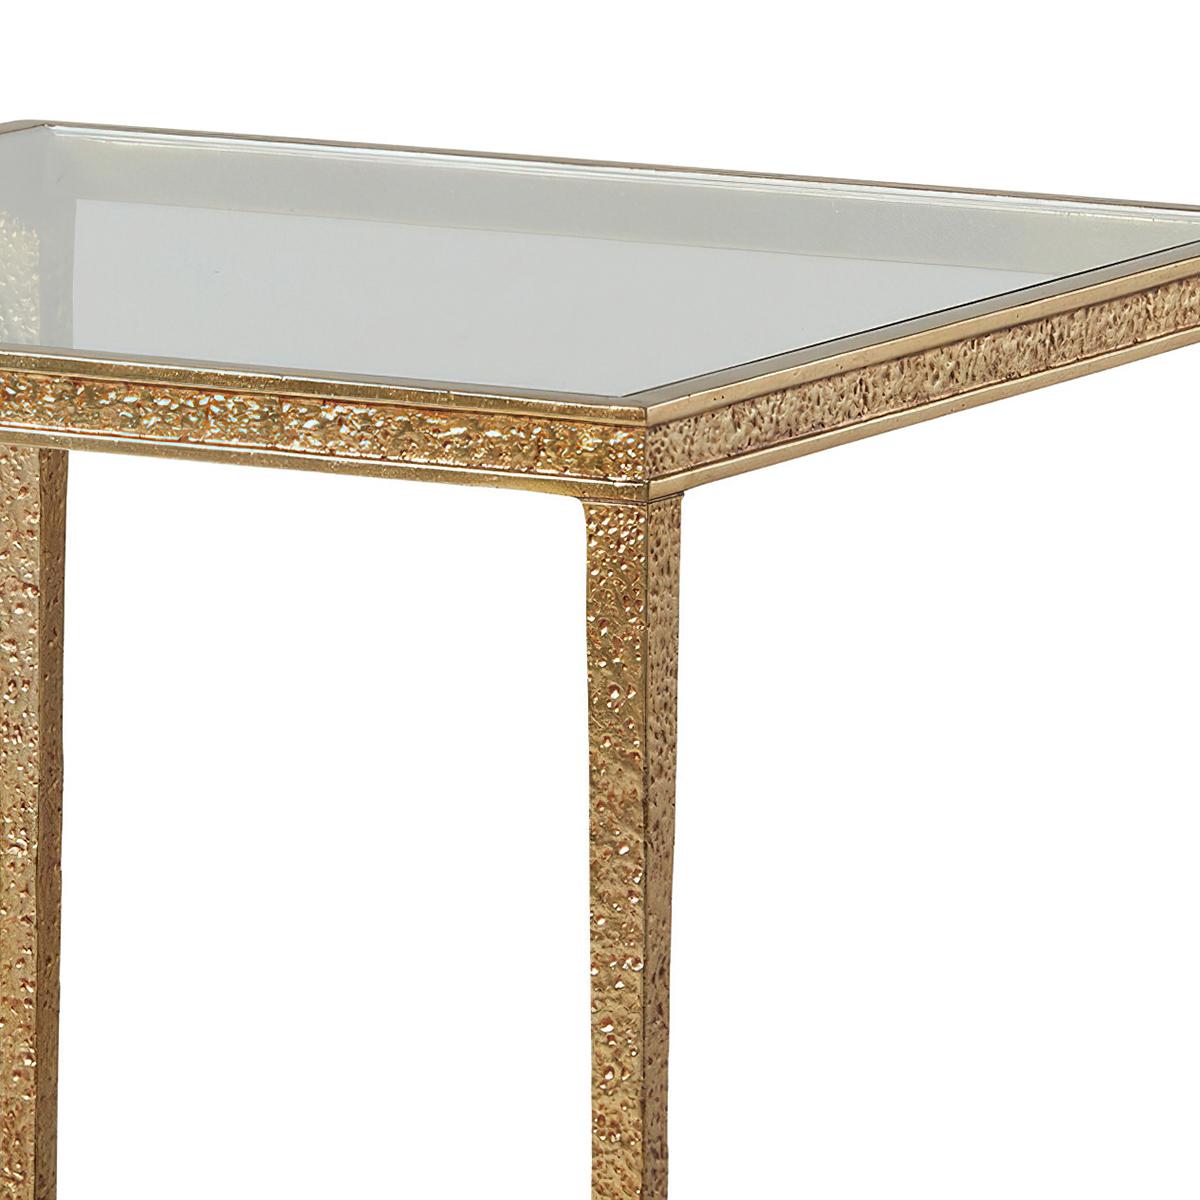 Bring a touch of elegance to your home with this Modern Square Gilt Textured End Table. Its unique texture appears to be Pointillism art, creating a one-of-a-kind look that will impress your guests. The brass frame and textured gold finish give the